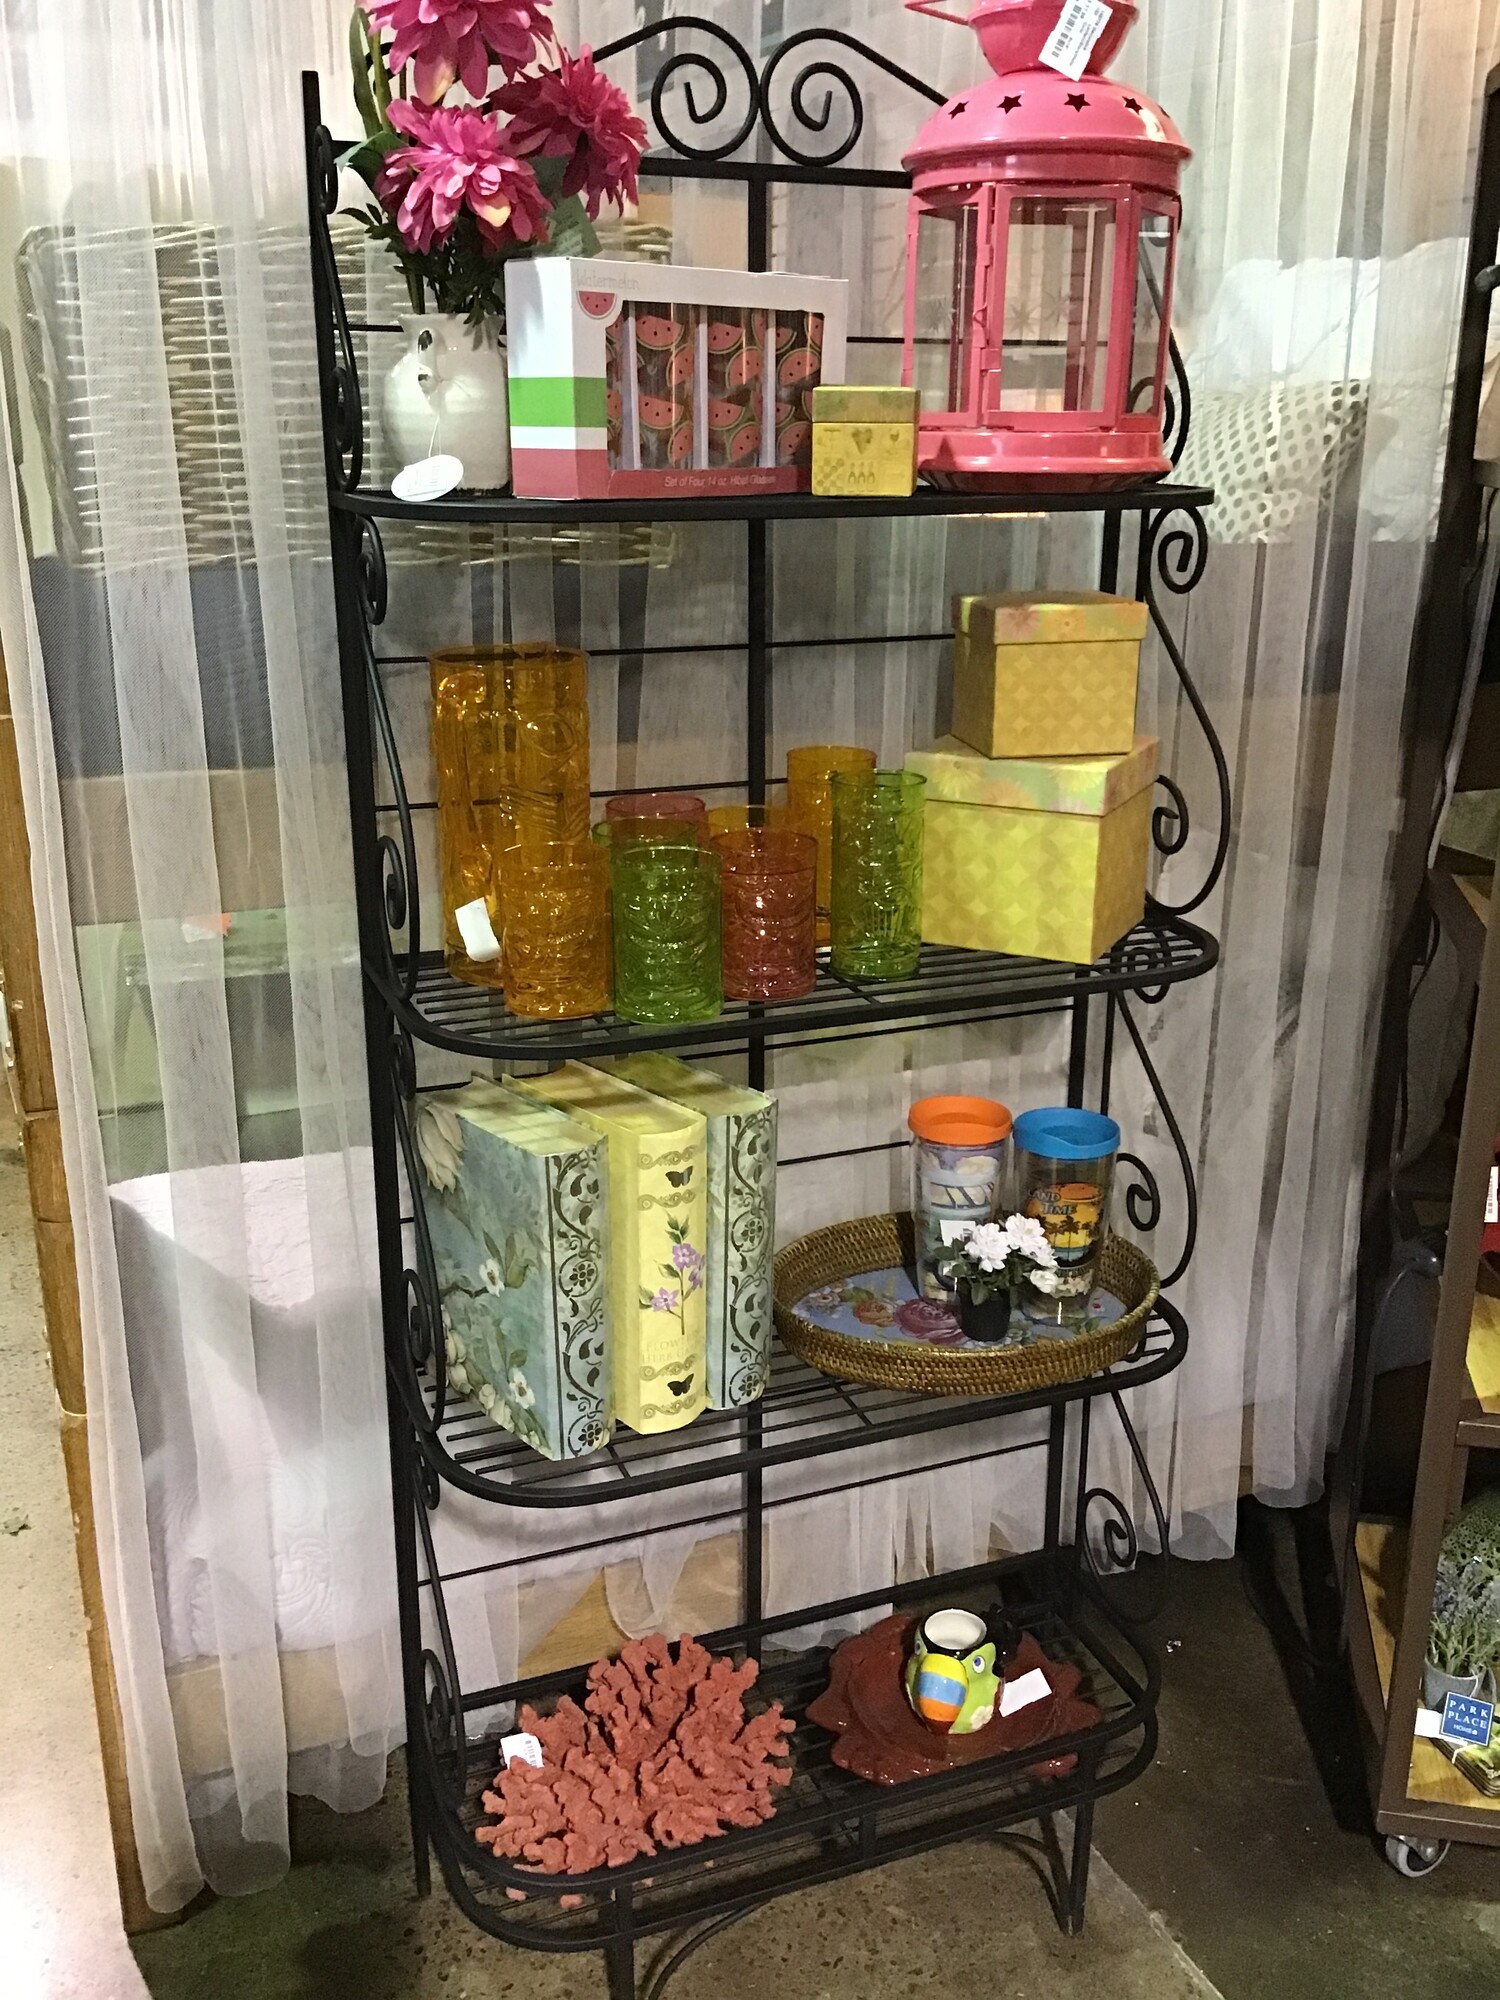 This super sturdy bakers rack features 4 grid shelves and is constructed of black iron. Great piece for a kitchen, porch or patio!
Dimensions are 30 in x 12 in x 70 in